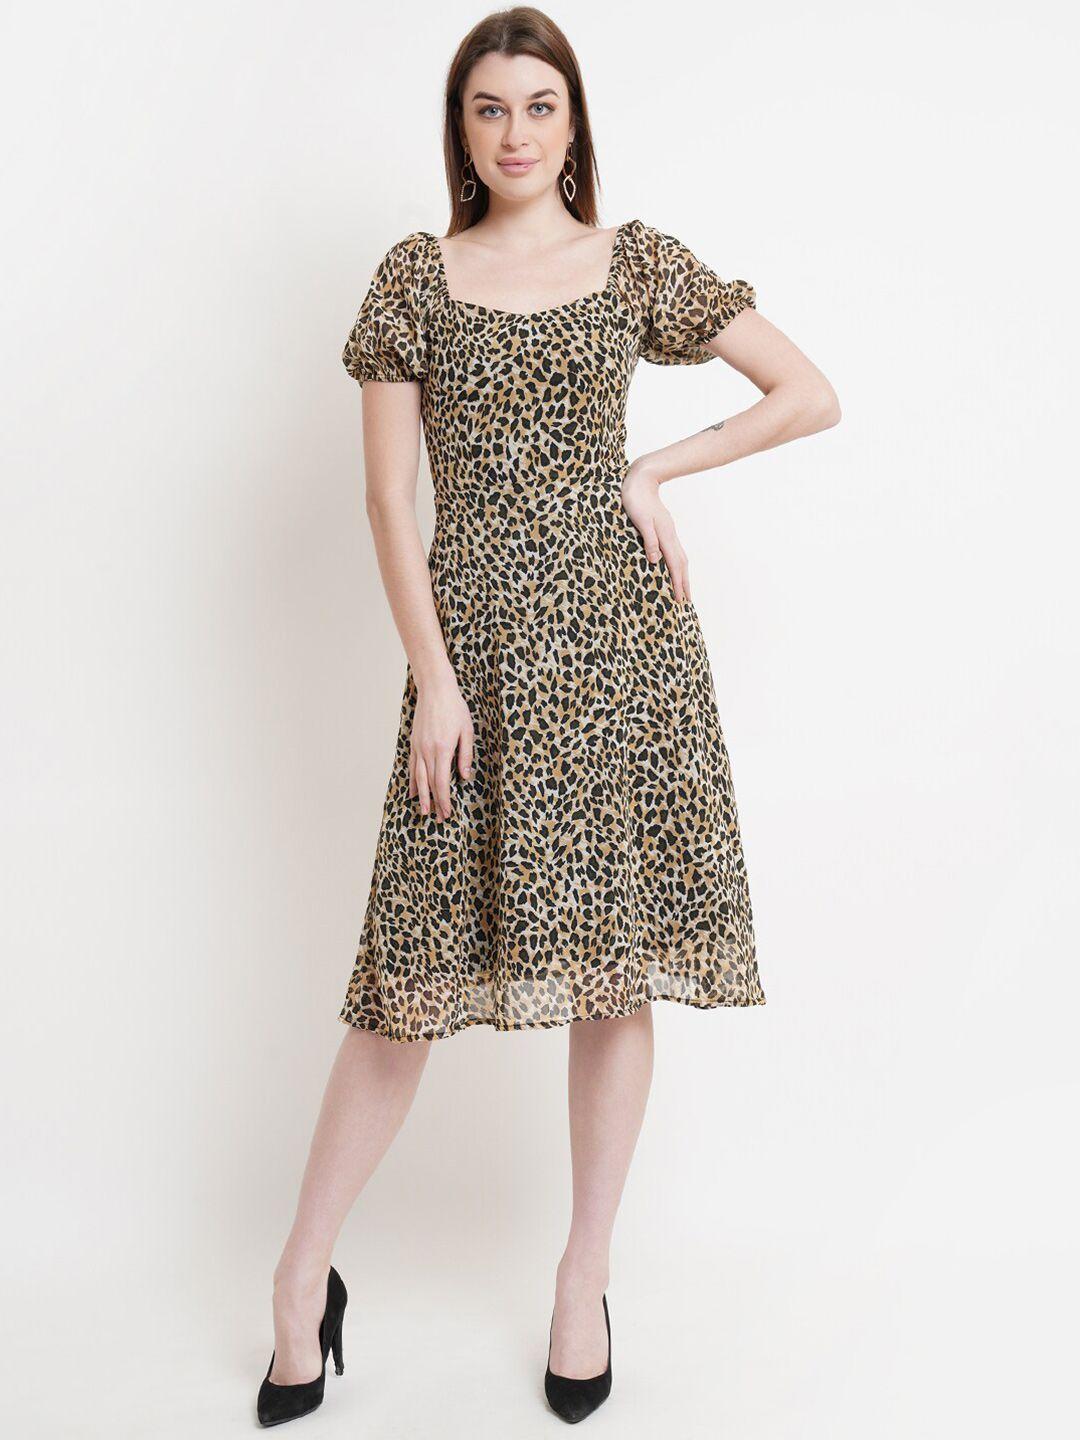 dodo & moa brown & black animal printed georgette fit & flared dress